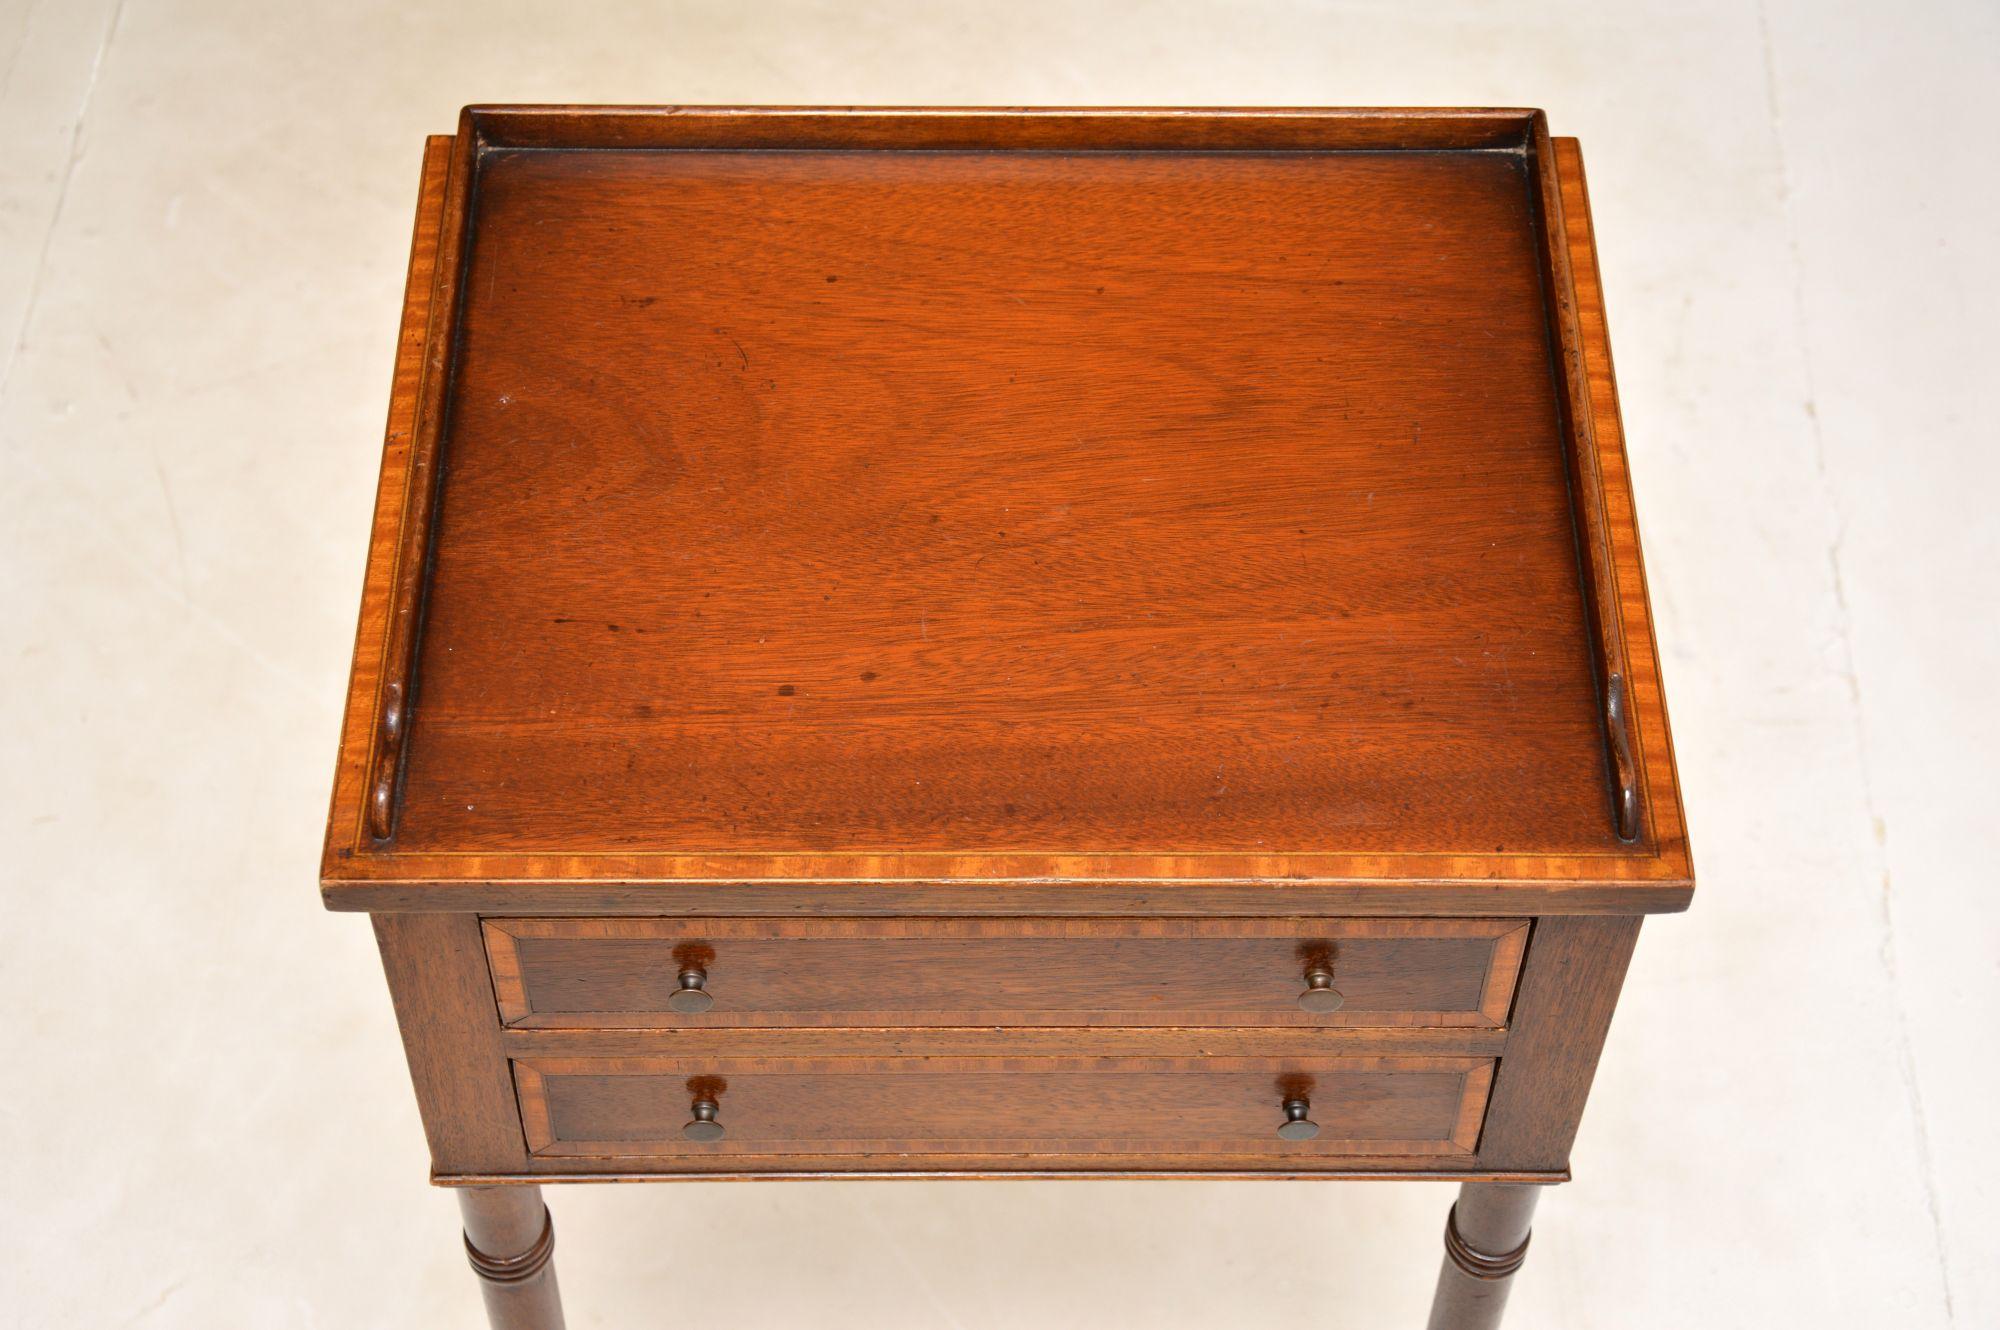 Wood Antique Edwardian Inlaid Side Table